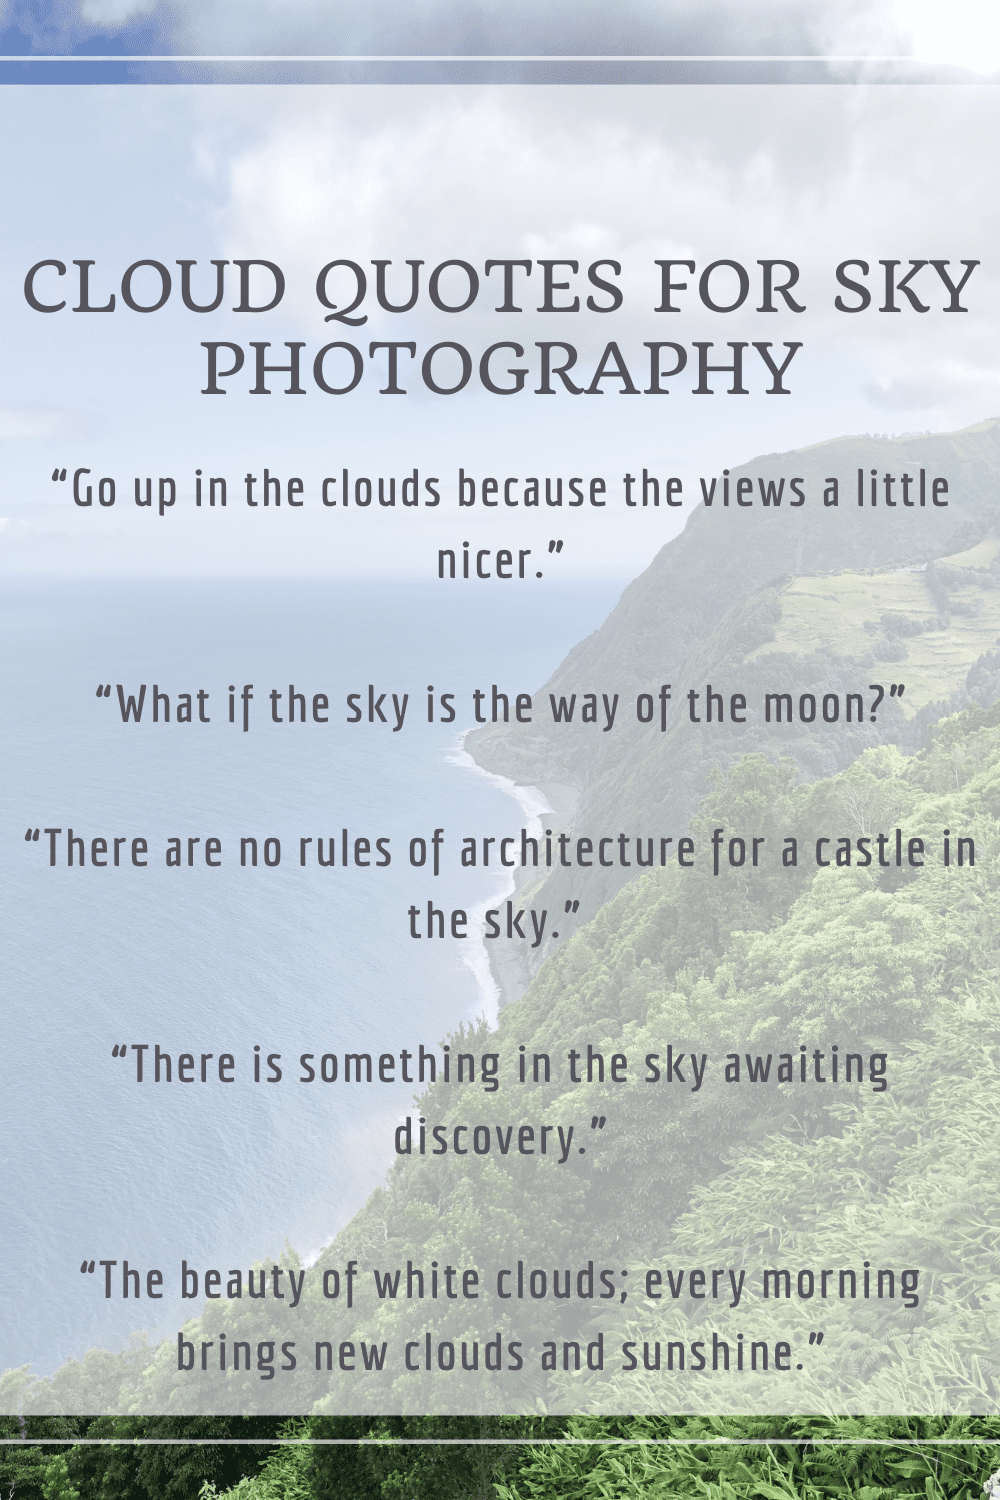 Cloud Quotes for Sky Photography